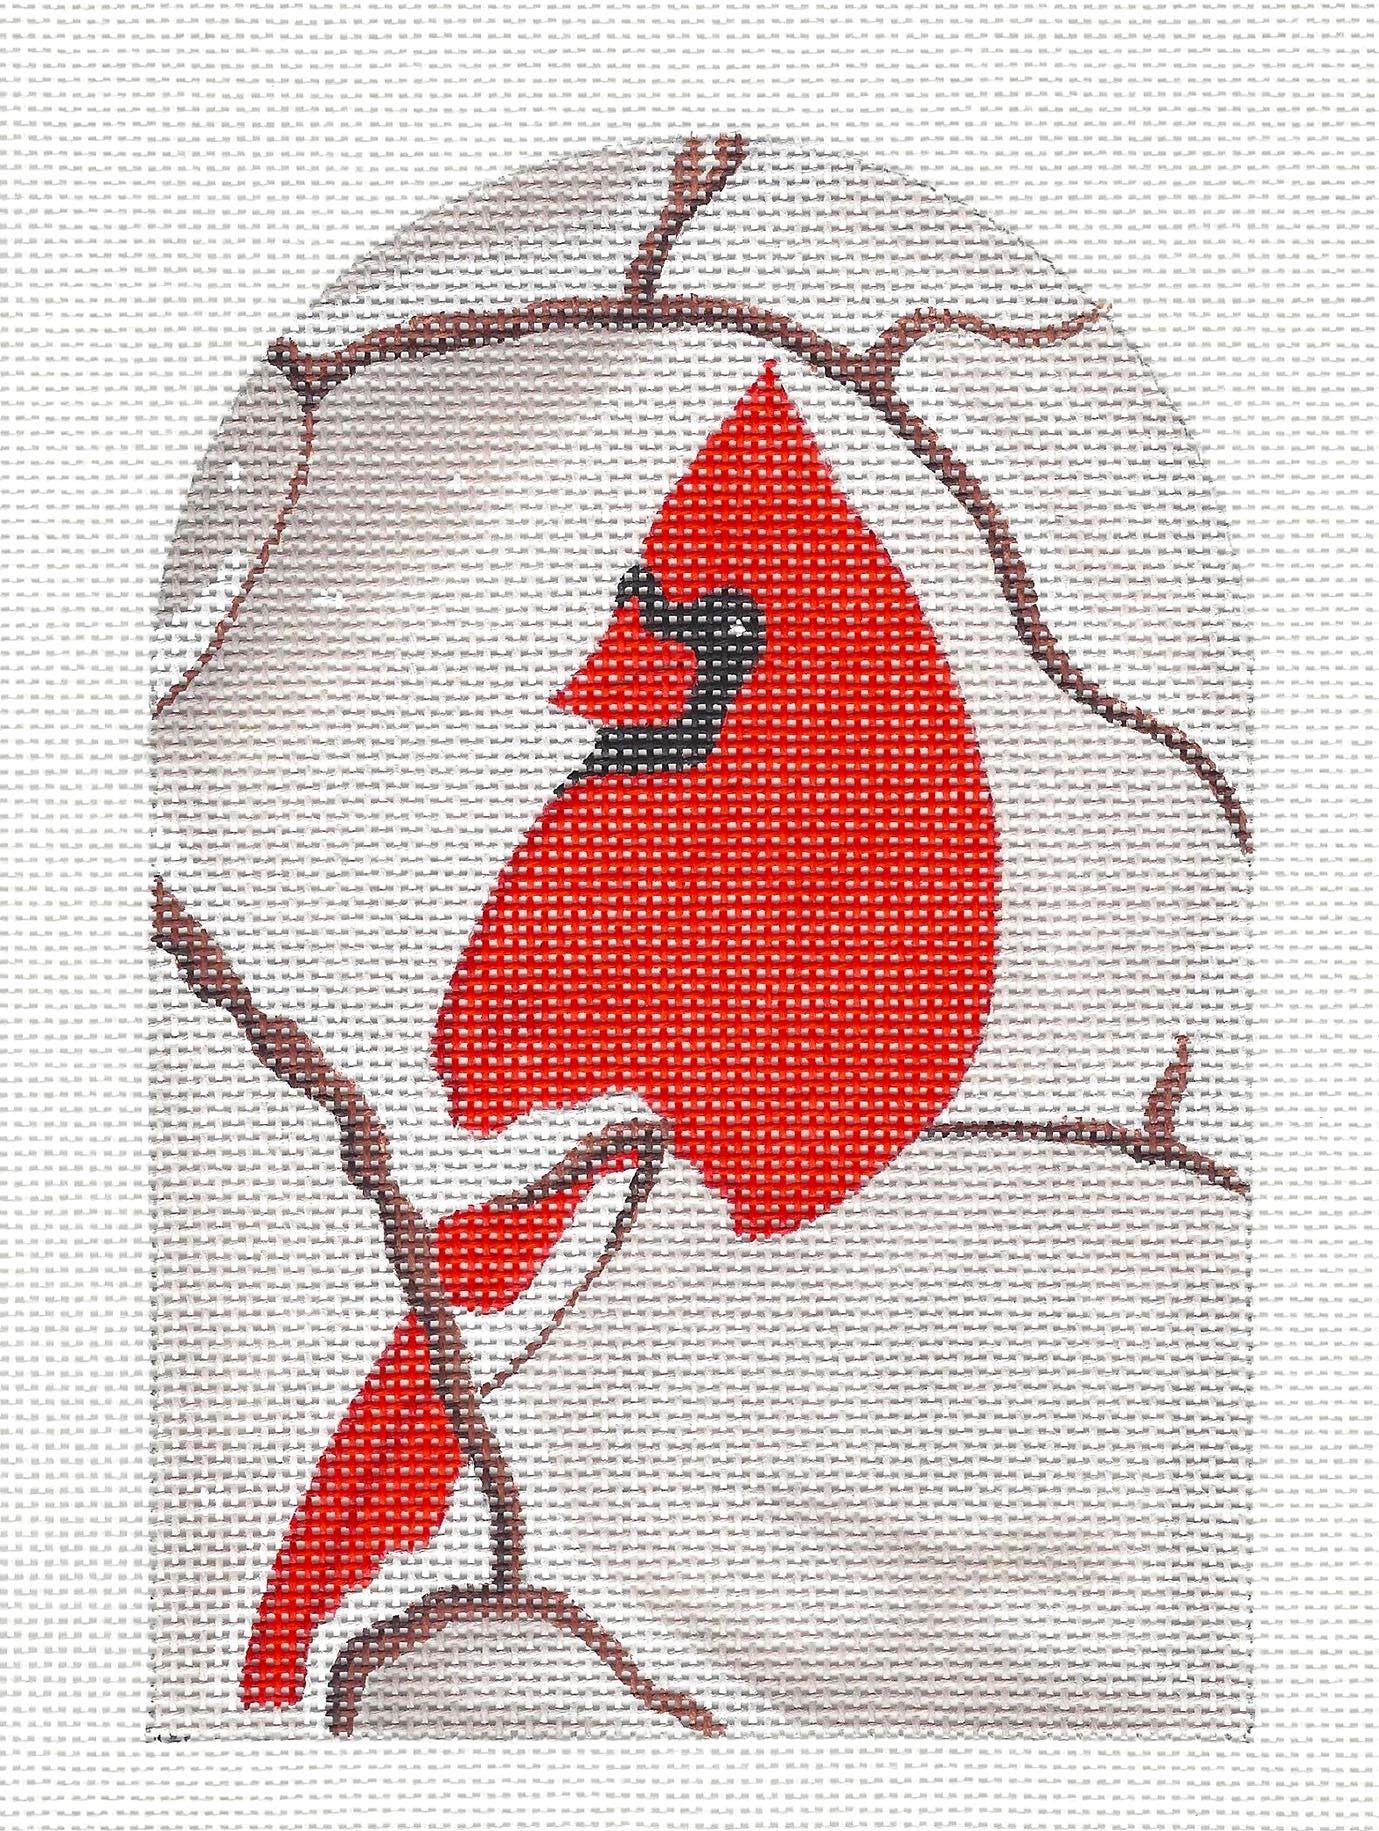 Bird Canvas ~ Winter Cardinal in the Snow handpainted Needlepoint Canvas by Raymond Crawford